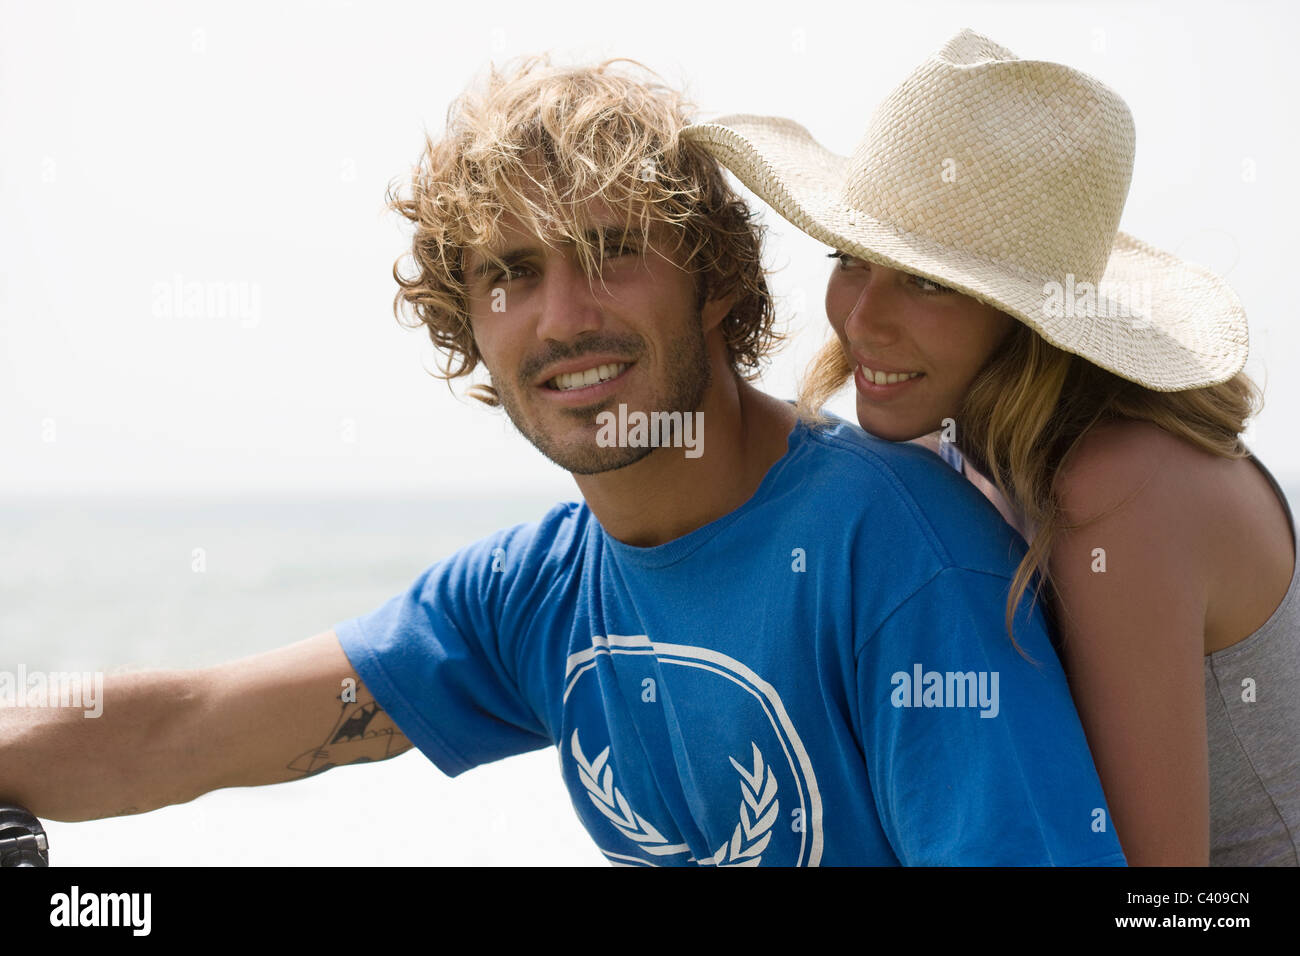 Guy and girl close together, smiling Stock Photo